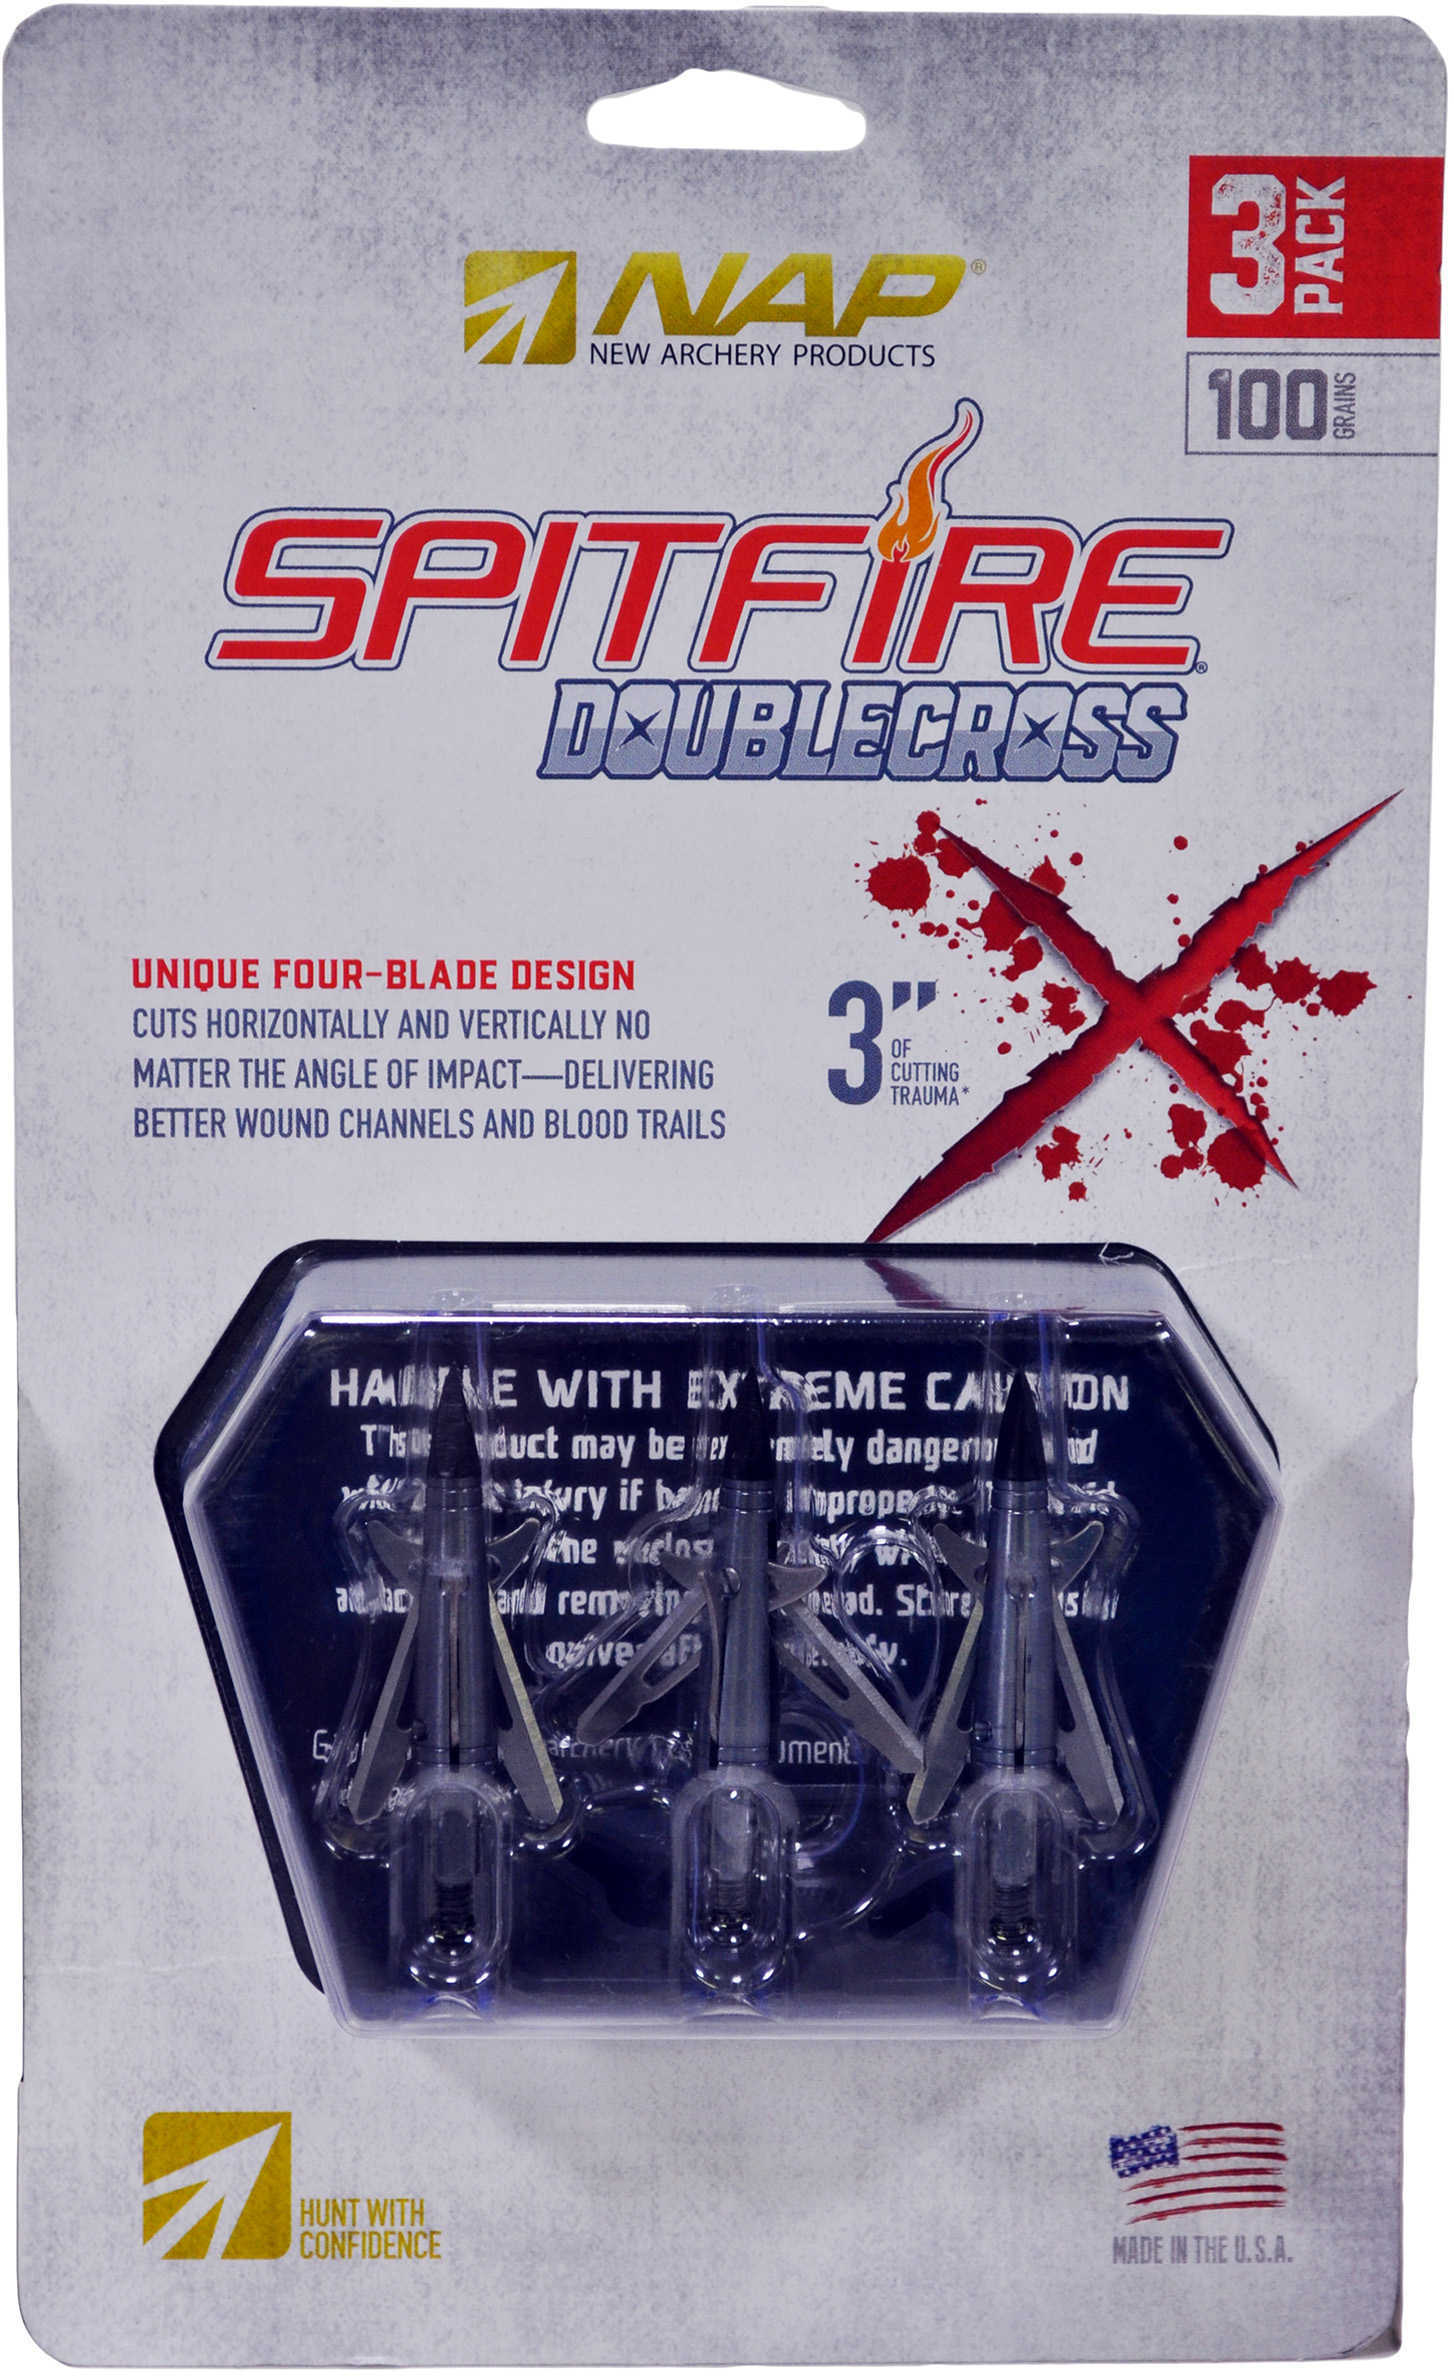 New Archery Products Spitfire Double Cross, 100 Grains, 3 Pack Md: 60-086